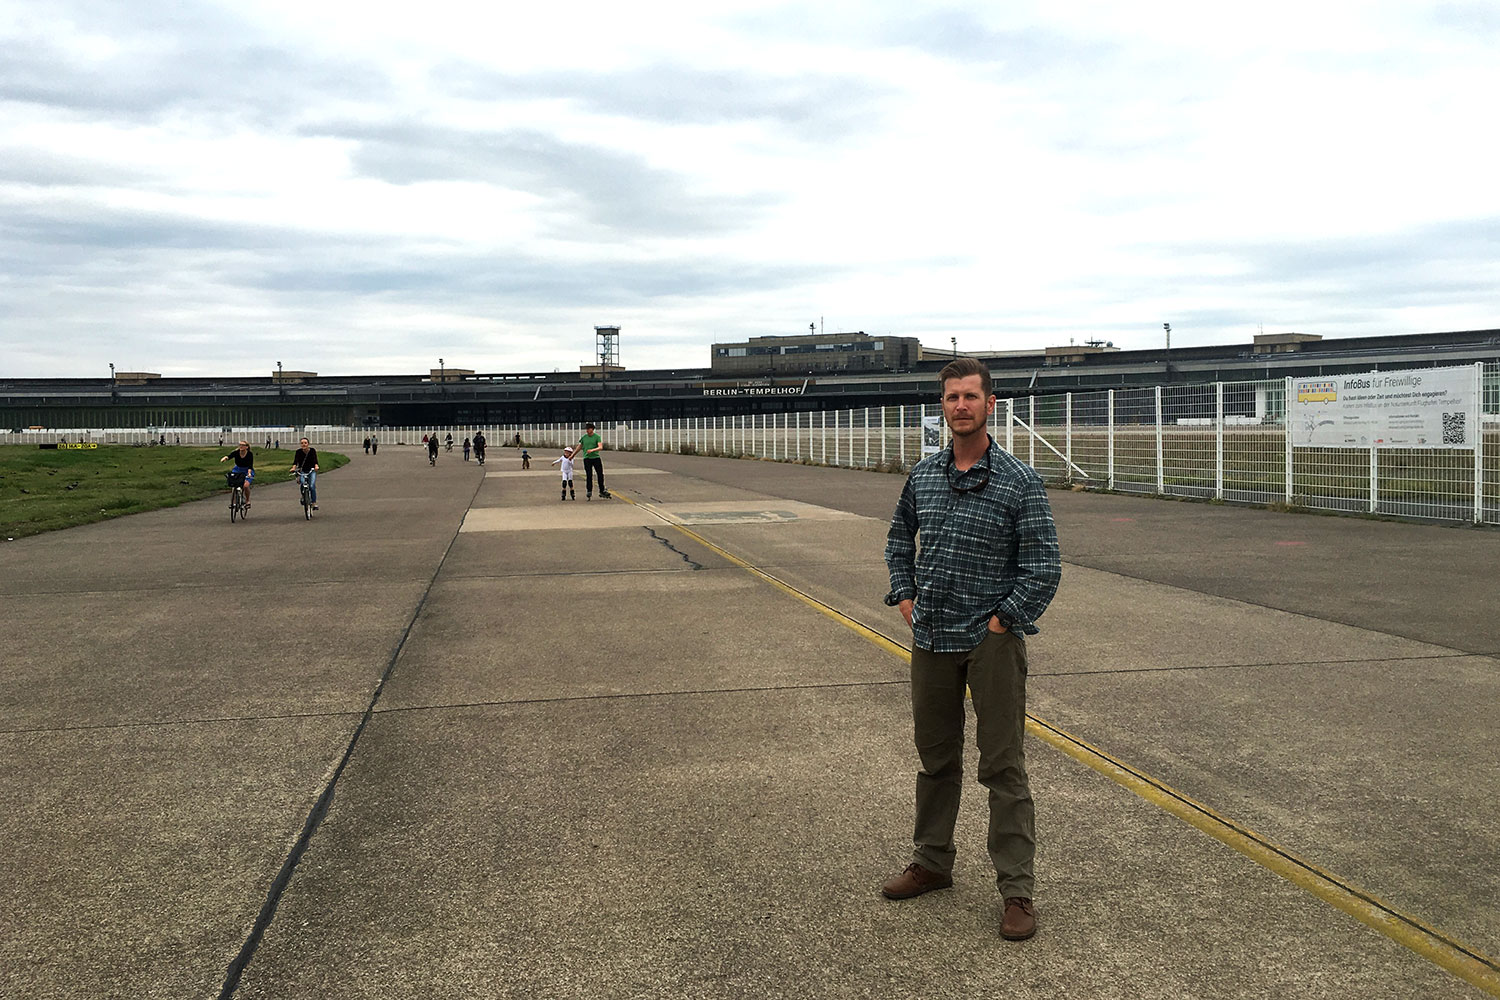 Darden student Seth Hooper, pictured at the Tempelhof Airport refugee camp in Berlin, founded Respit Solutions after 12 years working as an army medic and medical operations officer.